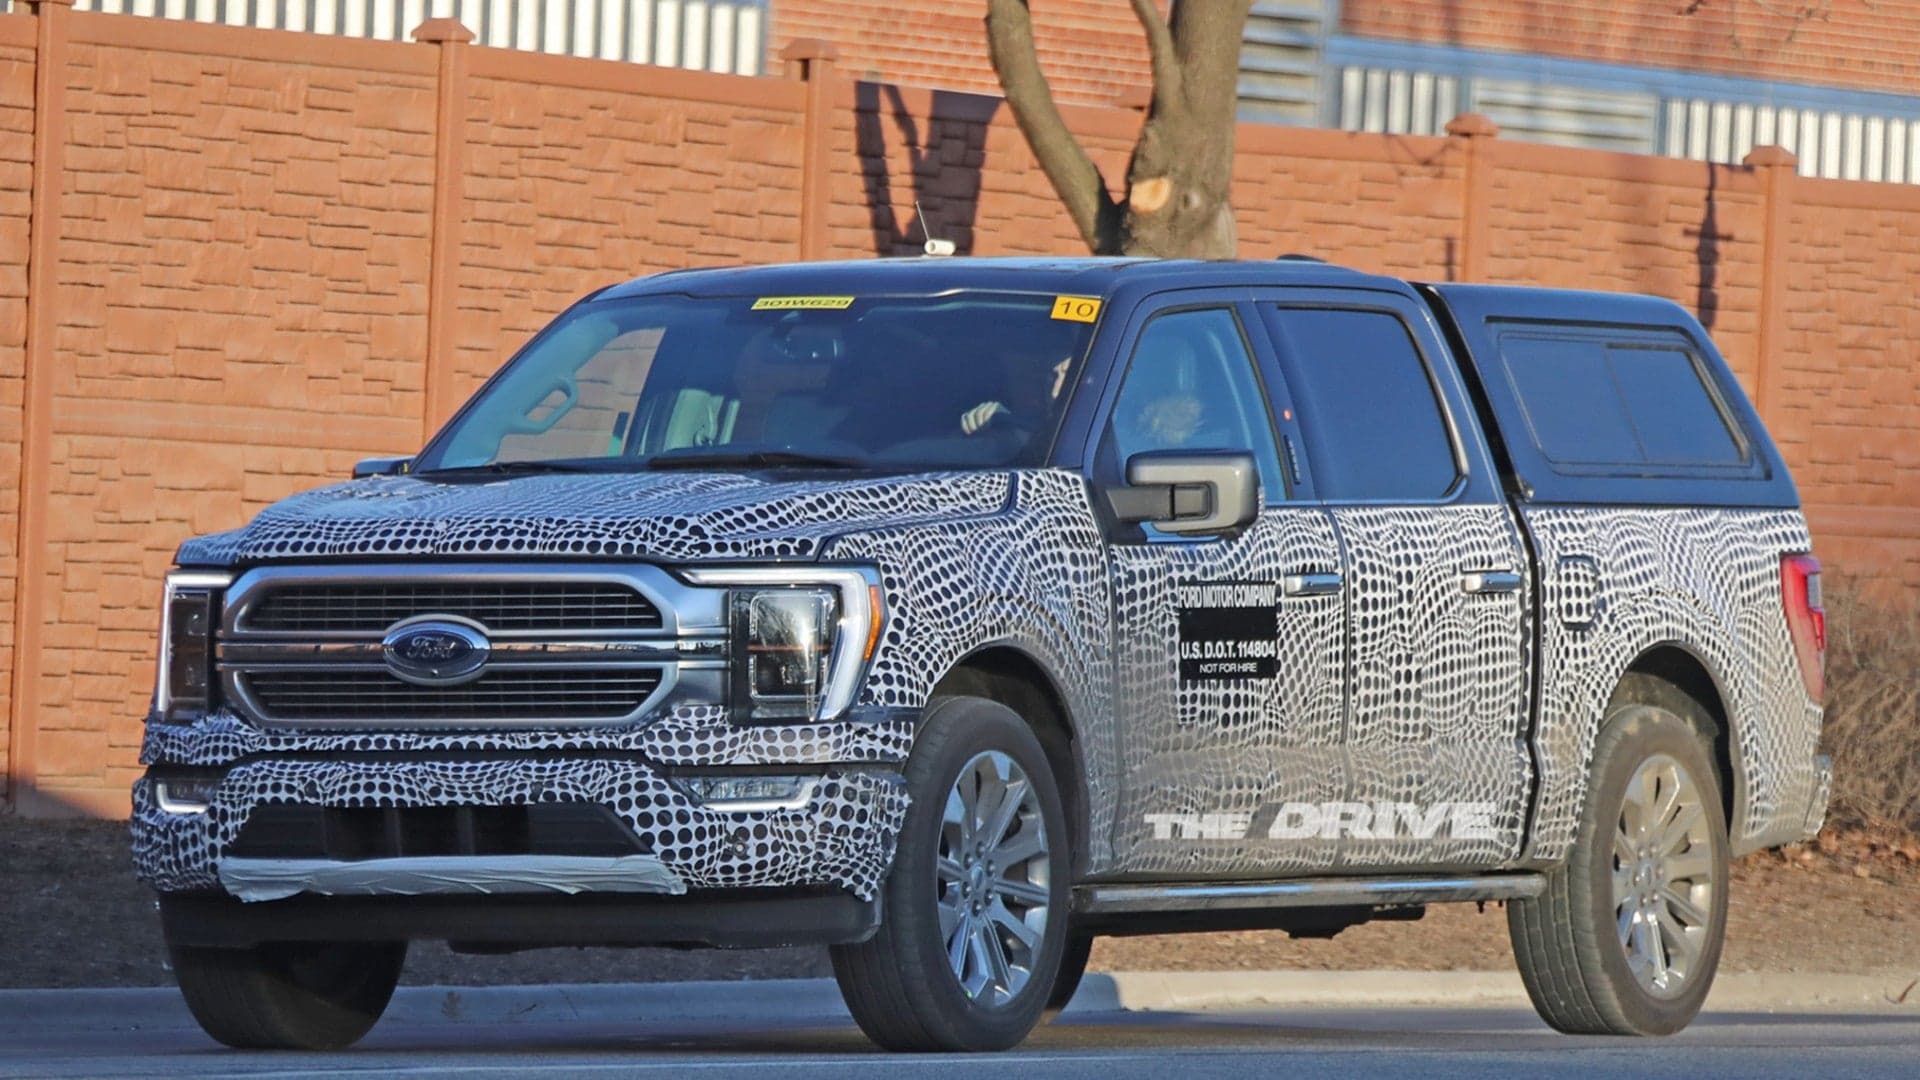 2021 Ford F-150 Will Have an Onboard Generator for Off-the-Grid Power: Report